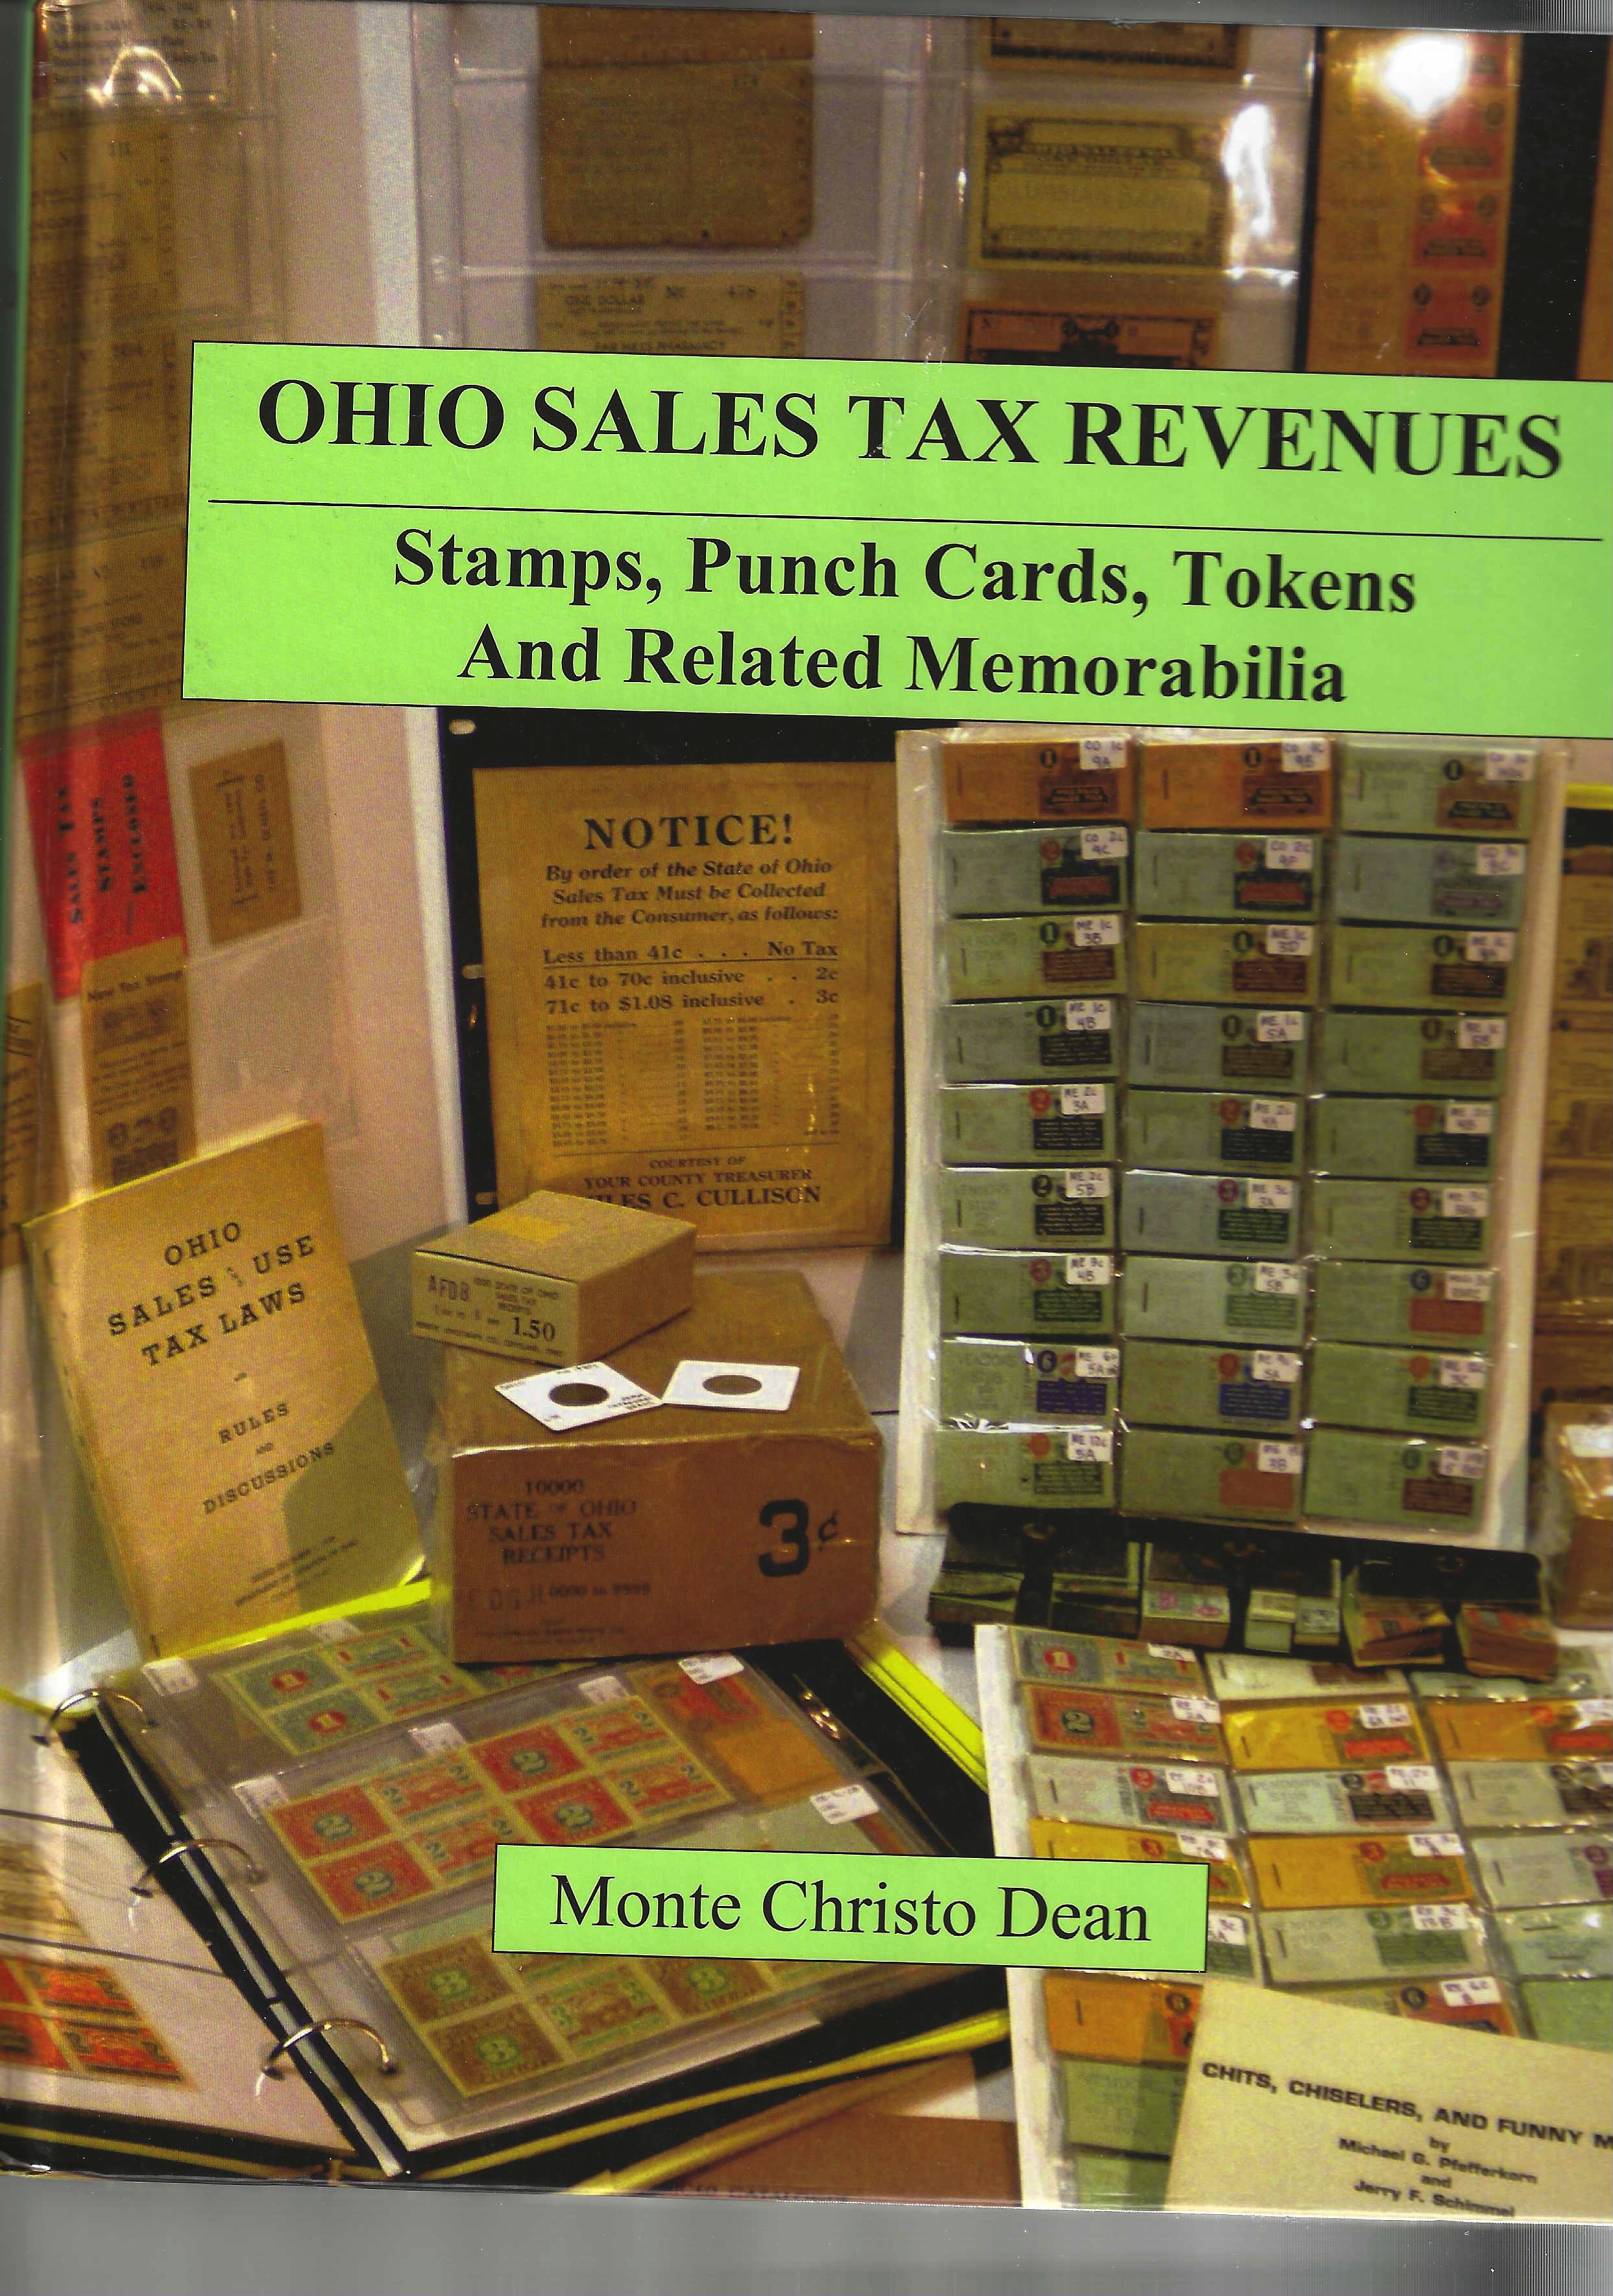 CATALOG - Ohio Sales Tax Revenues, 2022 by Monte Cristo Dean, autographed by author, new, originally sold for $97.00